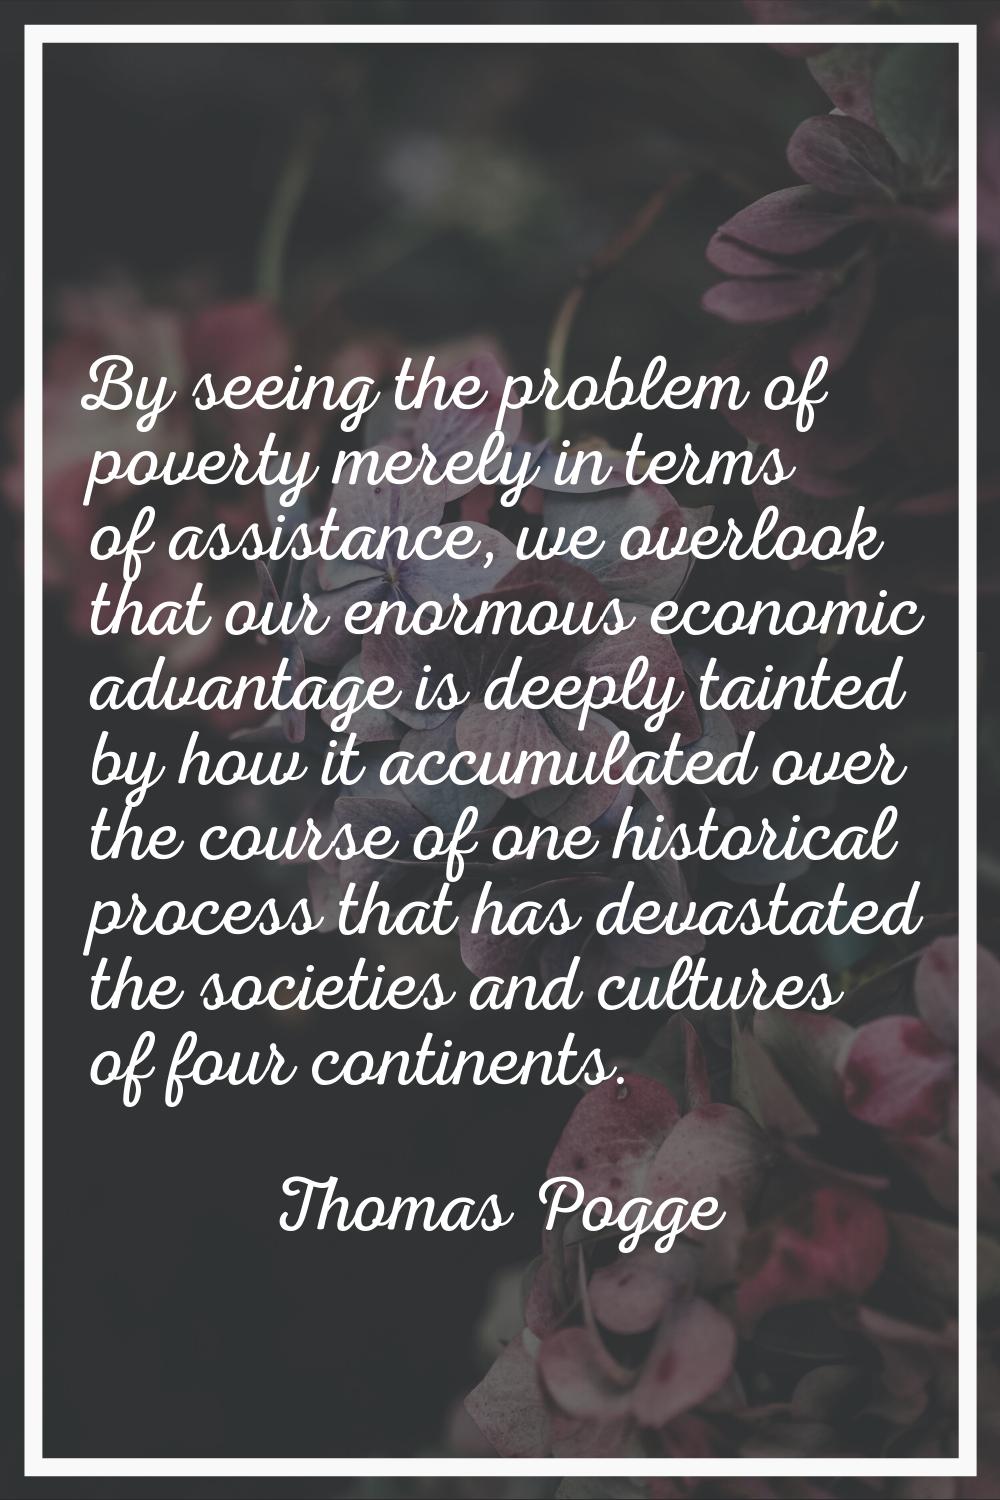 By seeing the problem of poverty merely in terms of assistance, we overlook that our enormous econo